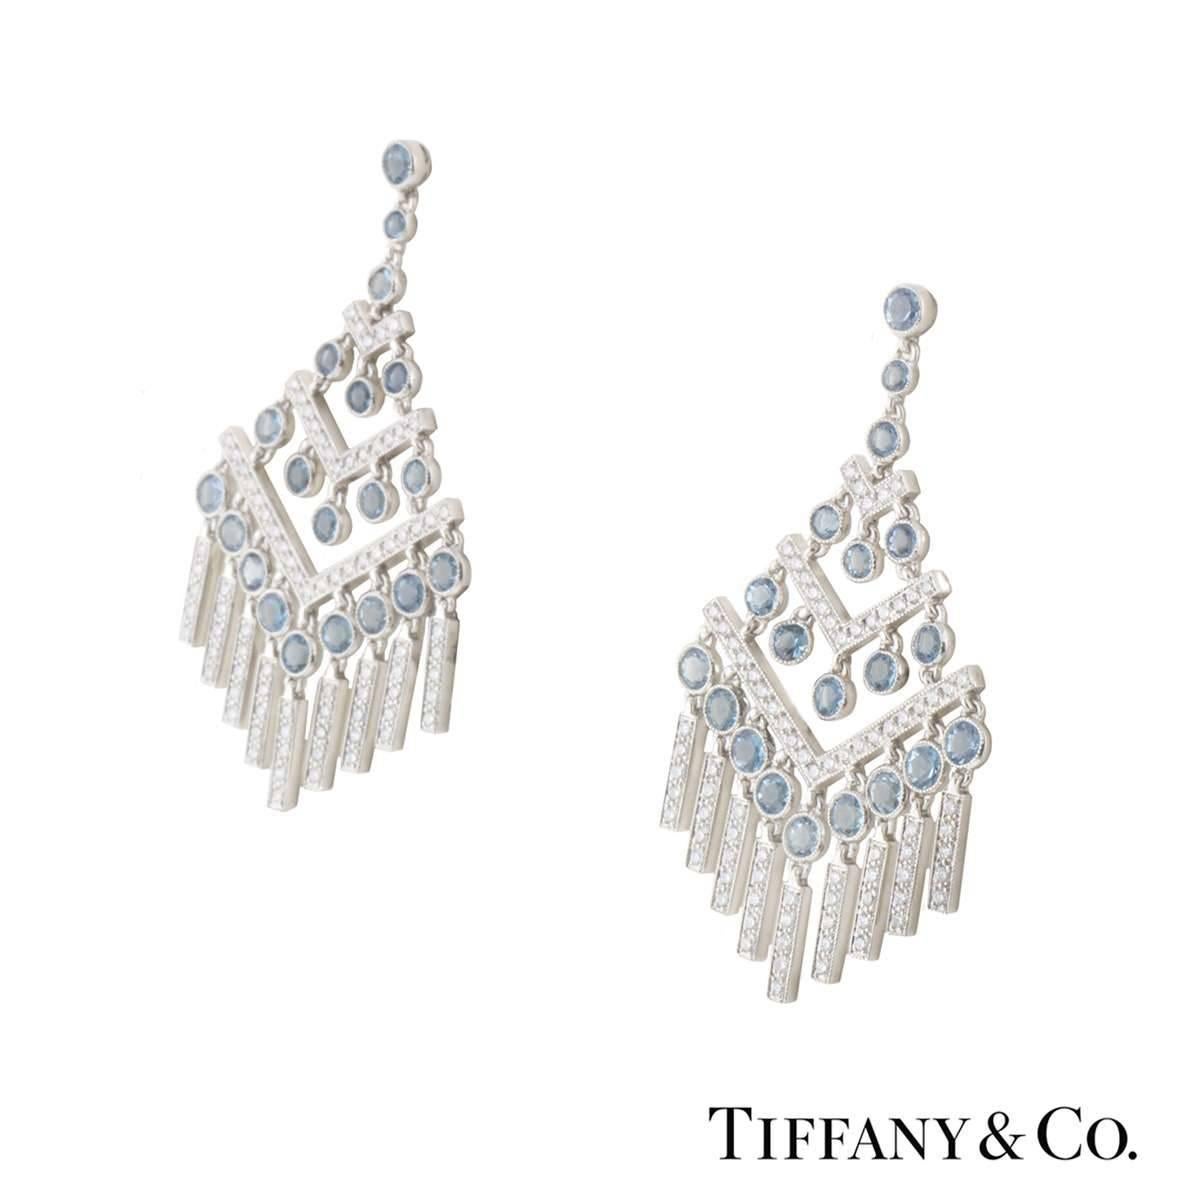 A beautiful pair of platinum diamond and aquamarine Tiffany & Co. chevron earrings from the Jazz collection. The earrings are comprised of a chandelier style with round brilliant cut diamonds and aquamarines placed alternatively in a vertical